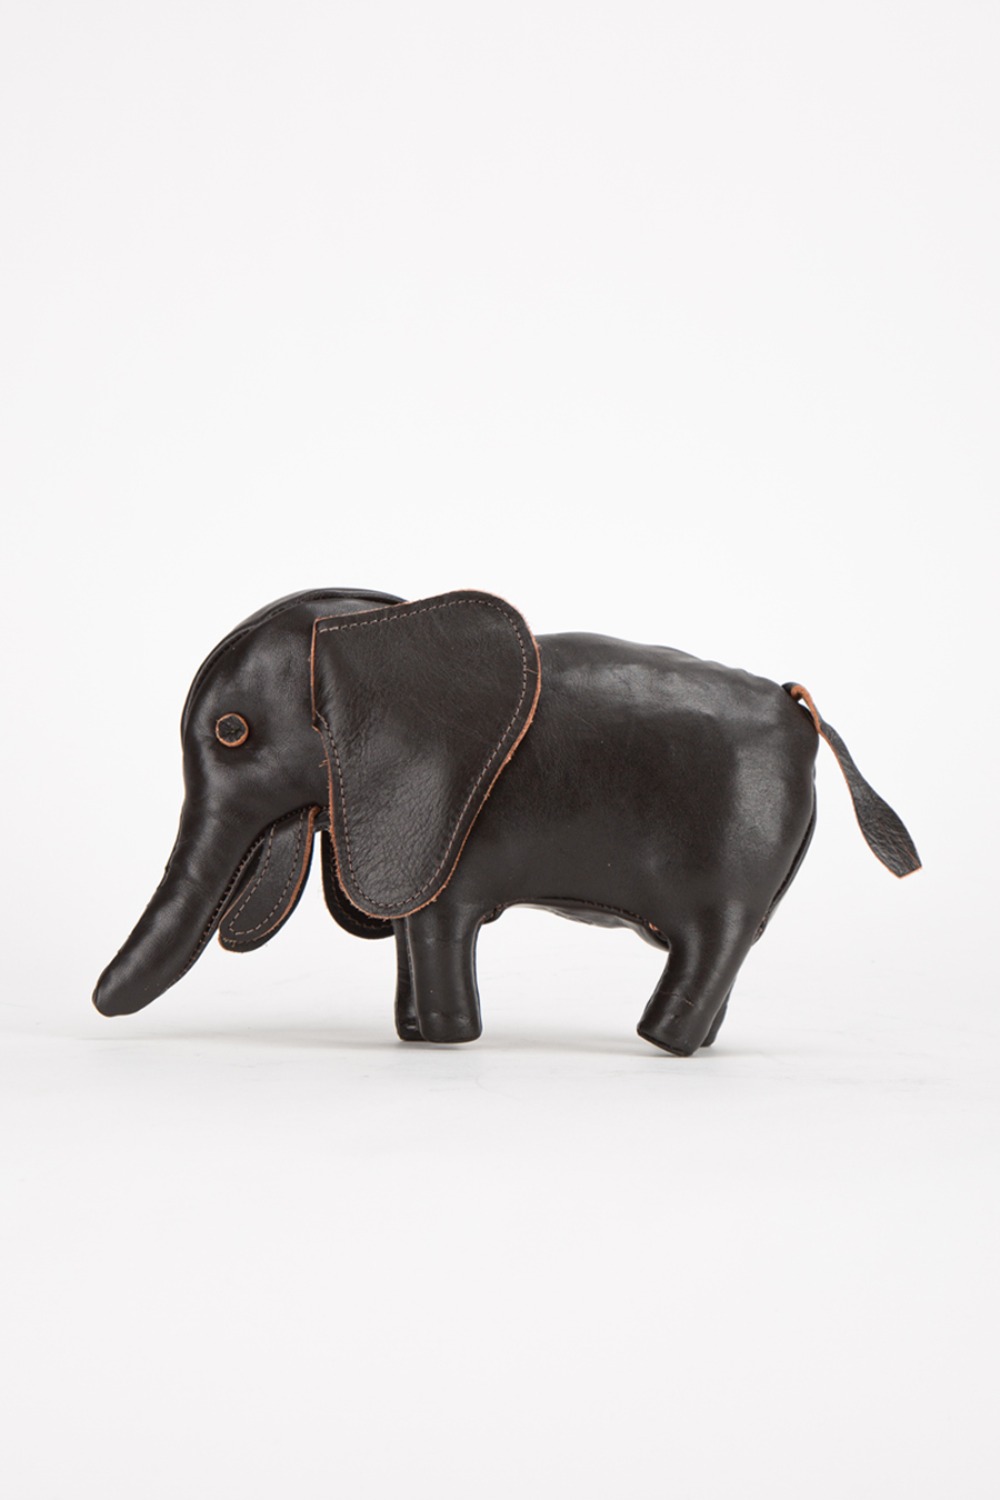 HANDCRAFTED HORSEHIDE ANIMALS (SMALL SIZE) ELEPHANT